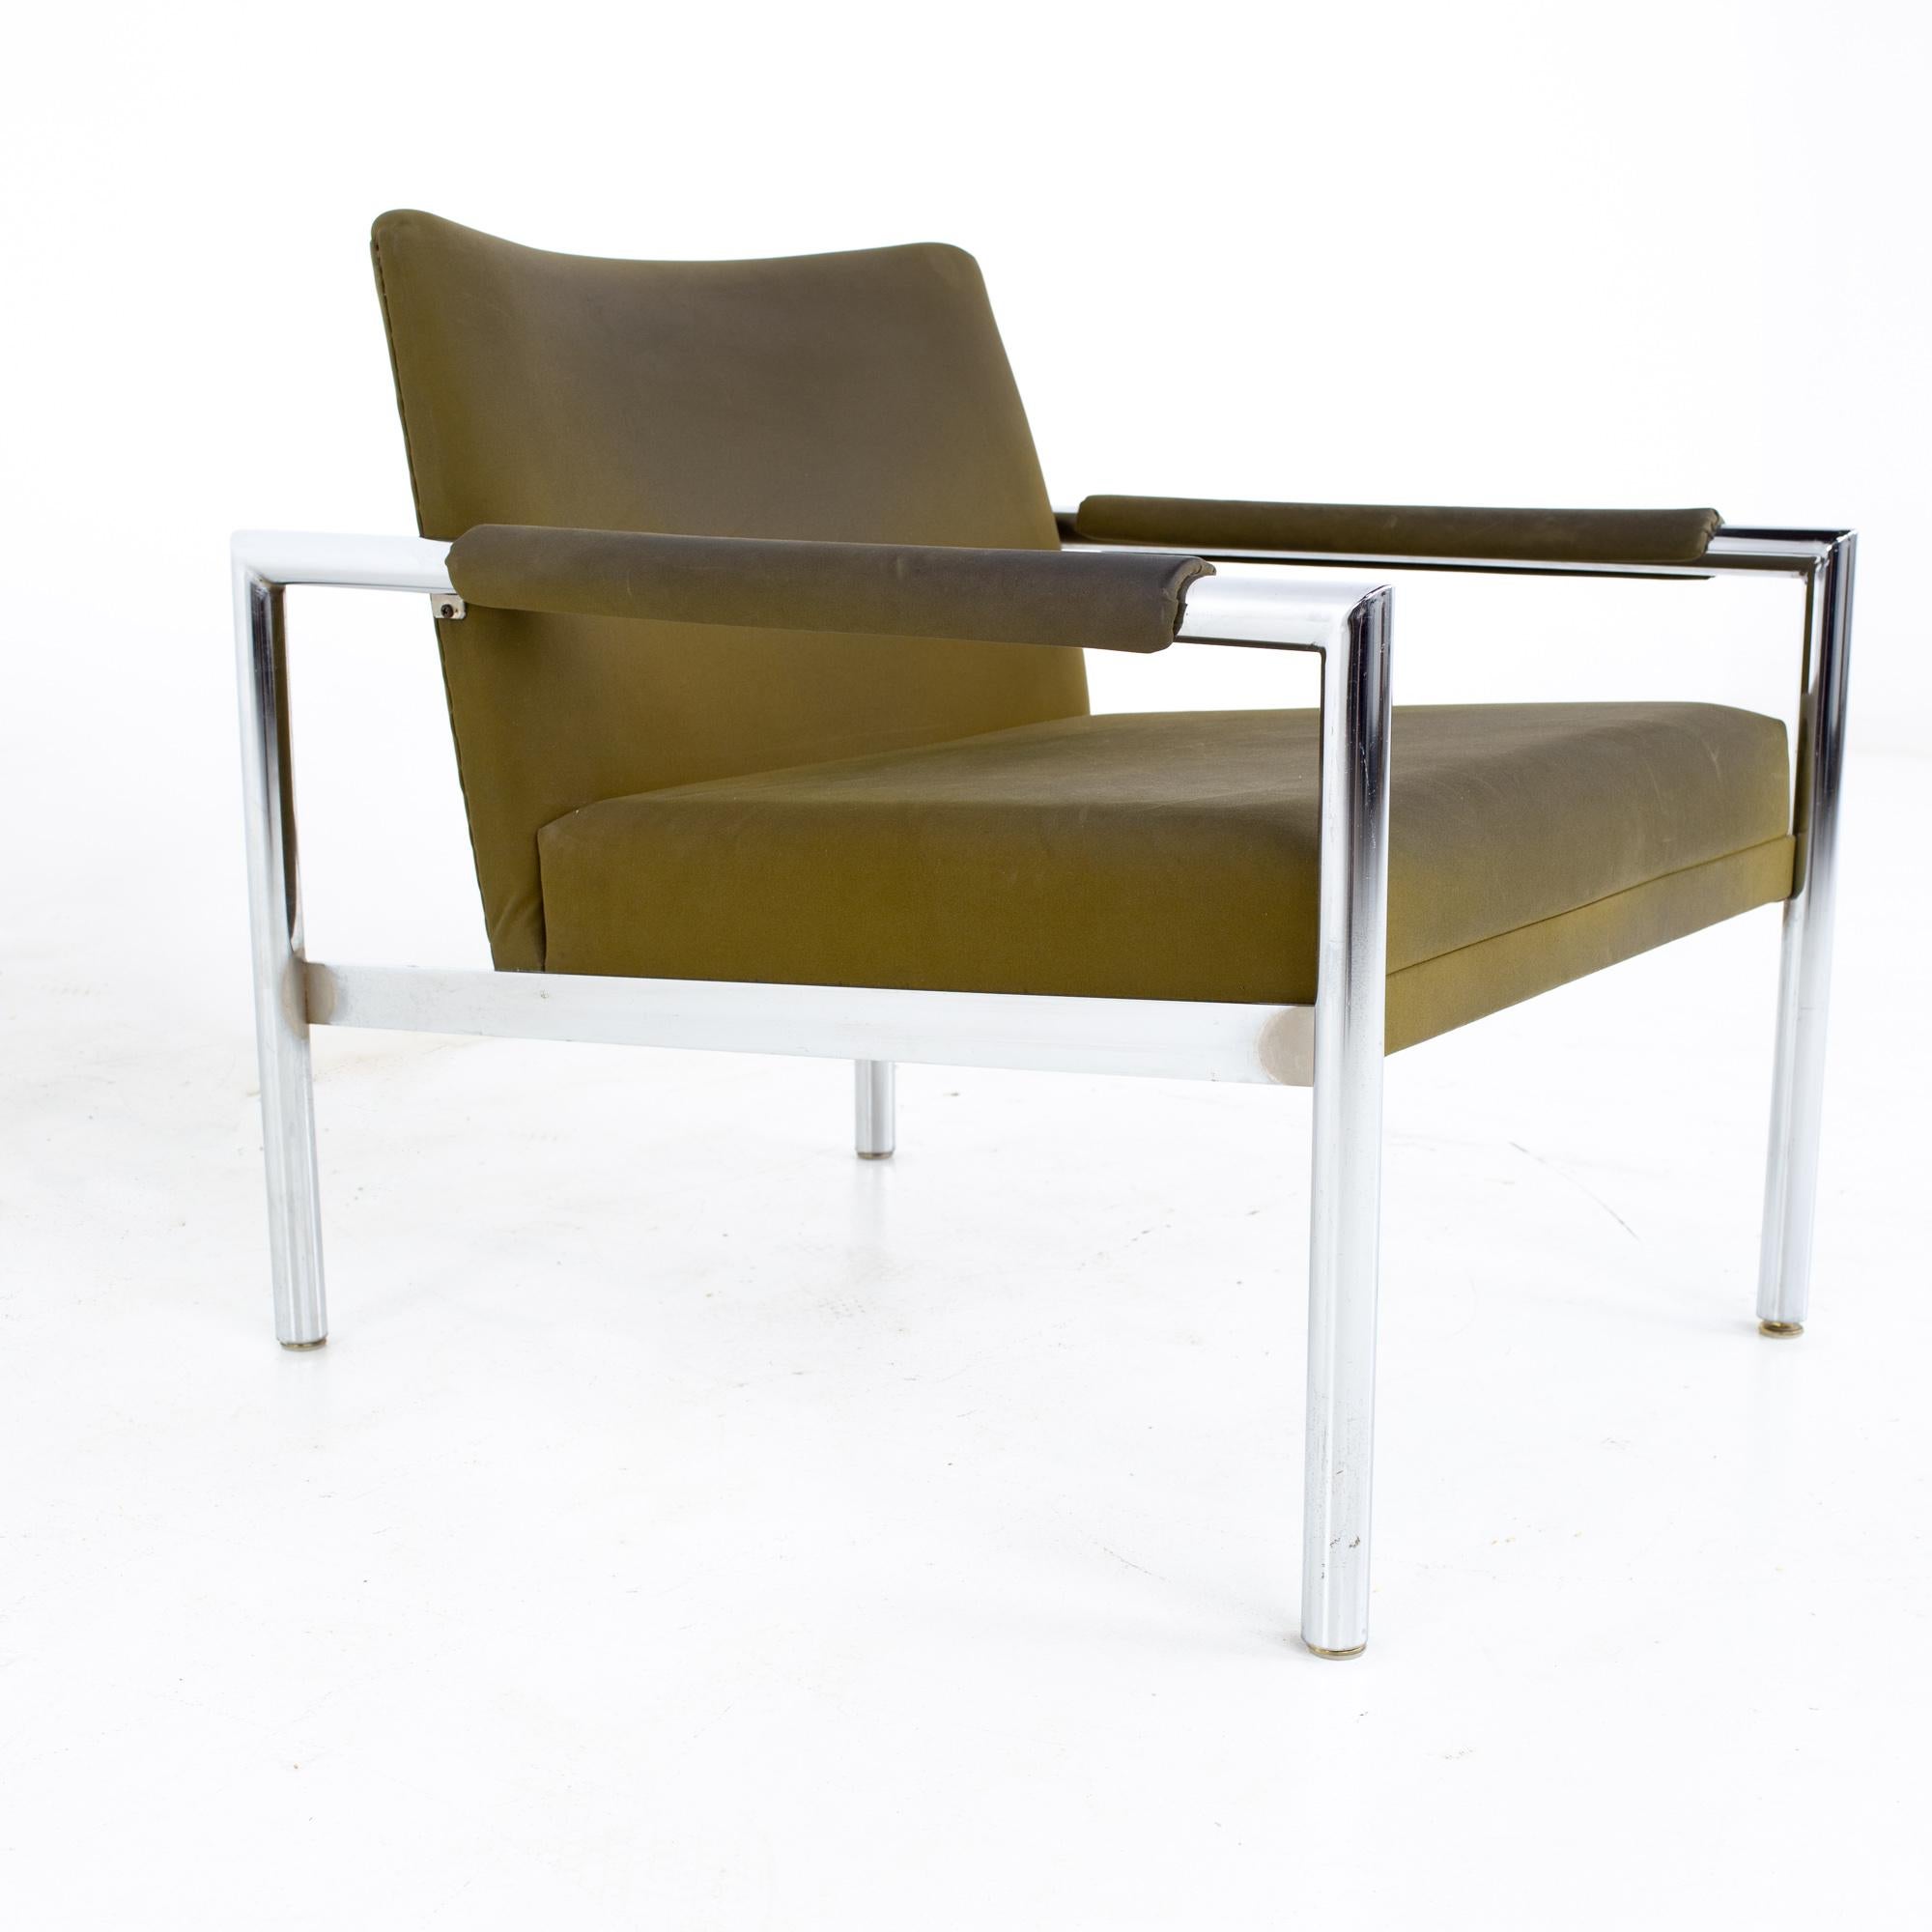 Late 20th Century Jack Cartwright for Founders Style Mid Century Chrome Lounge Chairs, a Pair